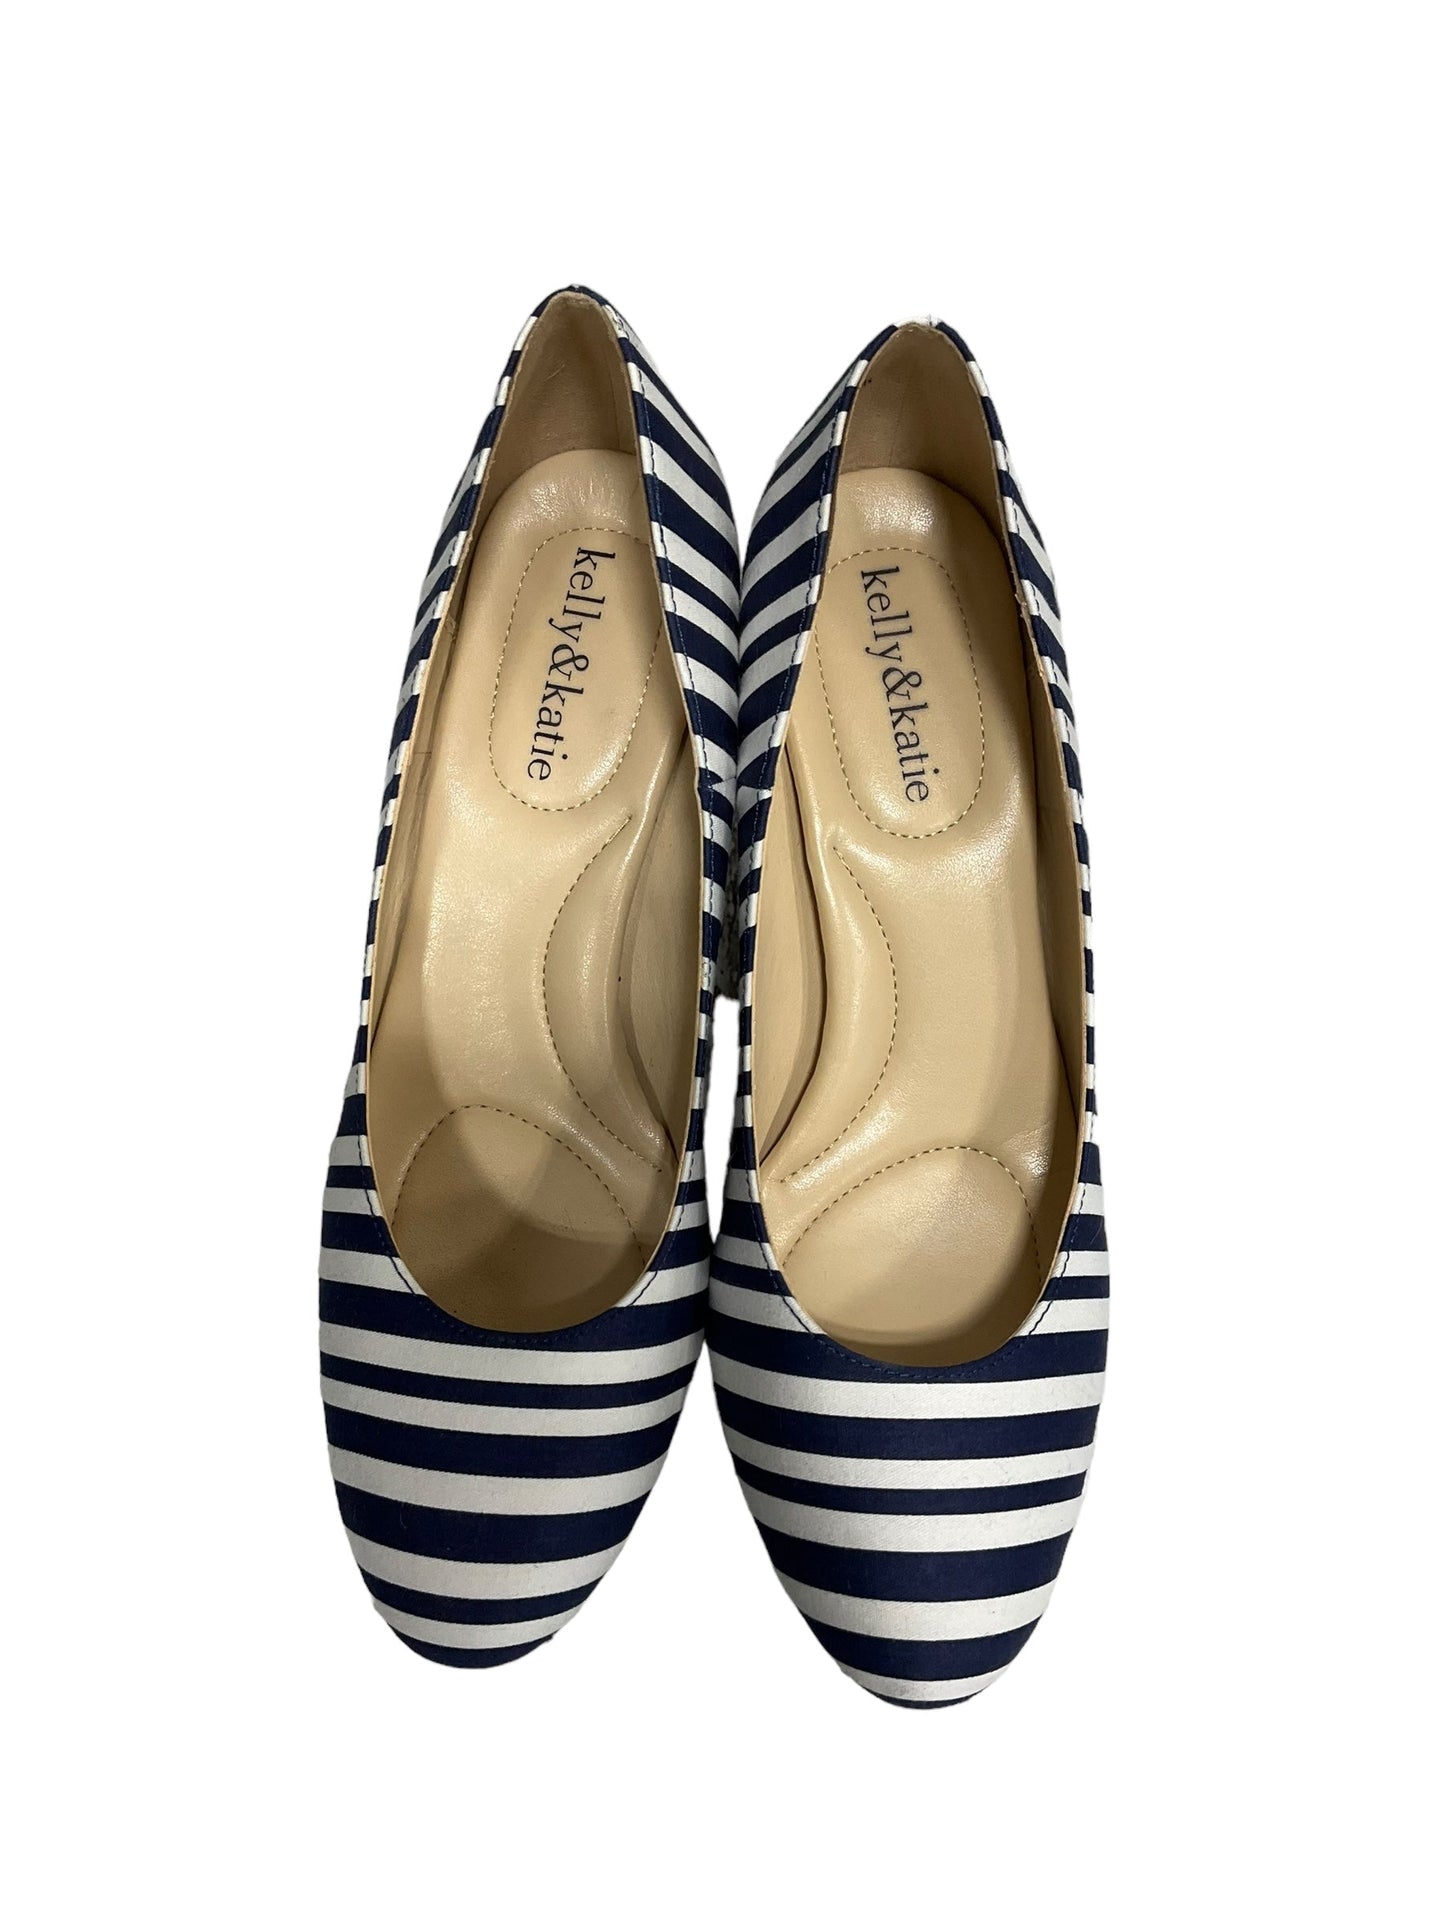 Blue & White Shoes Heels Stiletto Kelly And Katie, Size 8